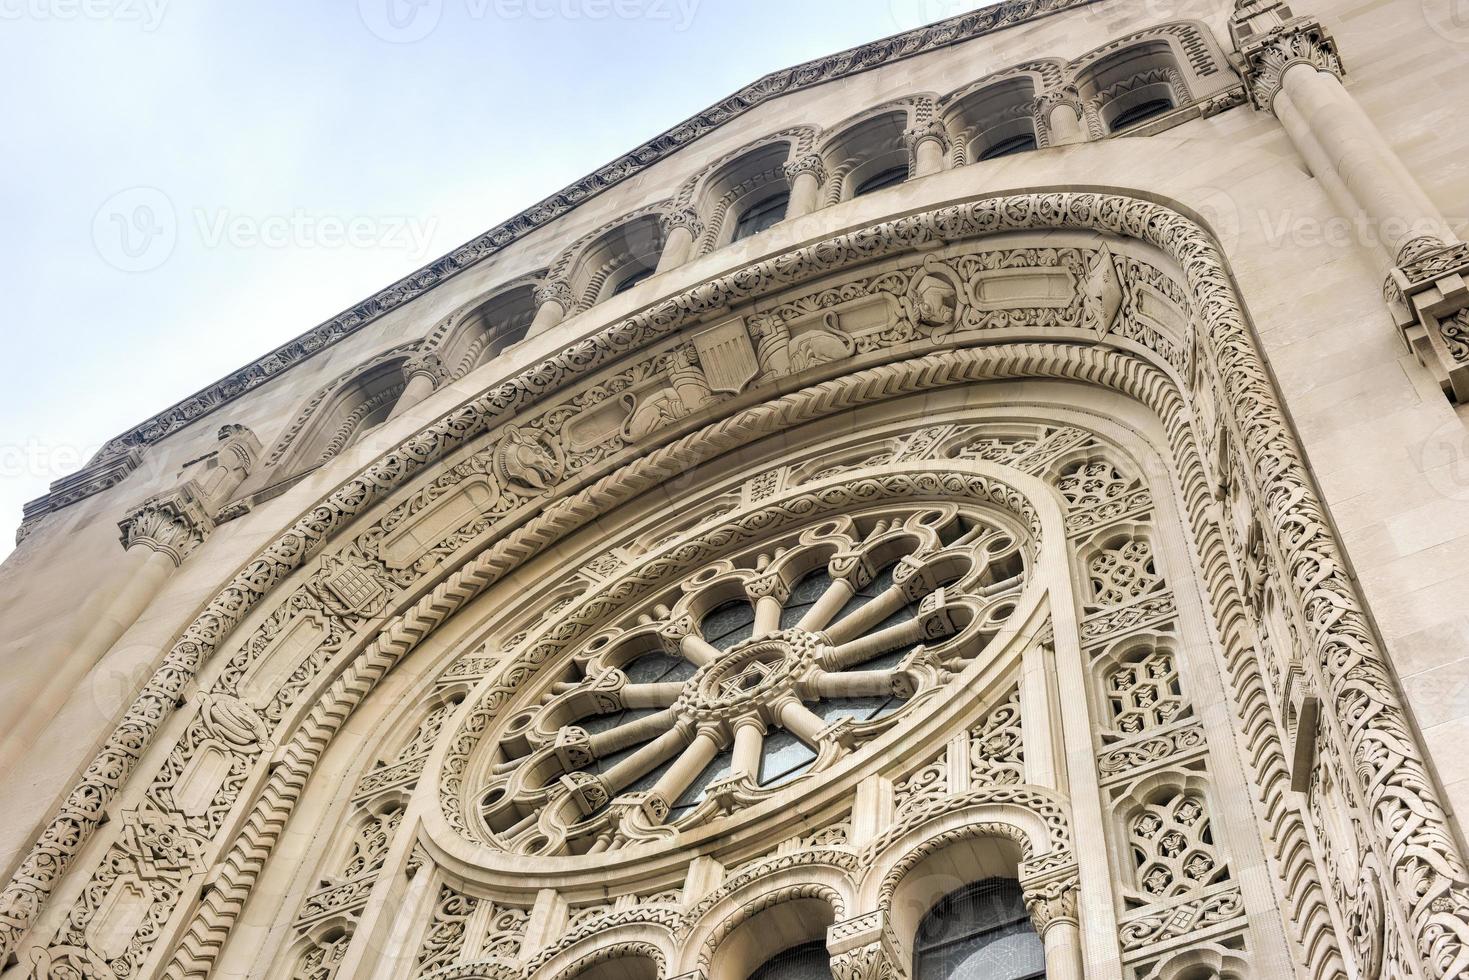 Temple Emanu-El was the first Reform Jewish congregation in New York City and, because of its size and prominence, has served as a flagship congregation in the Reform branch of Judaism. photo